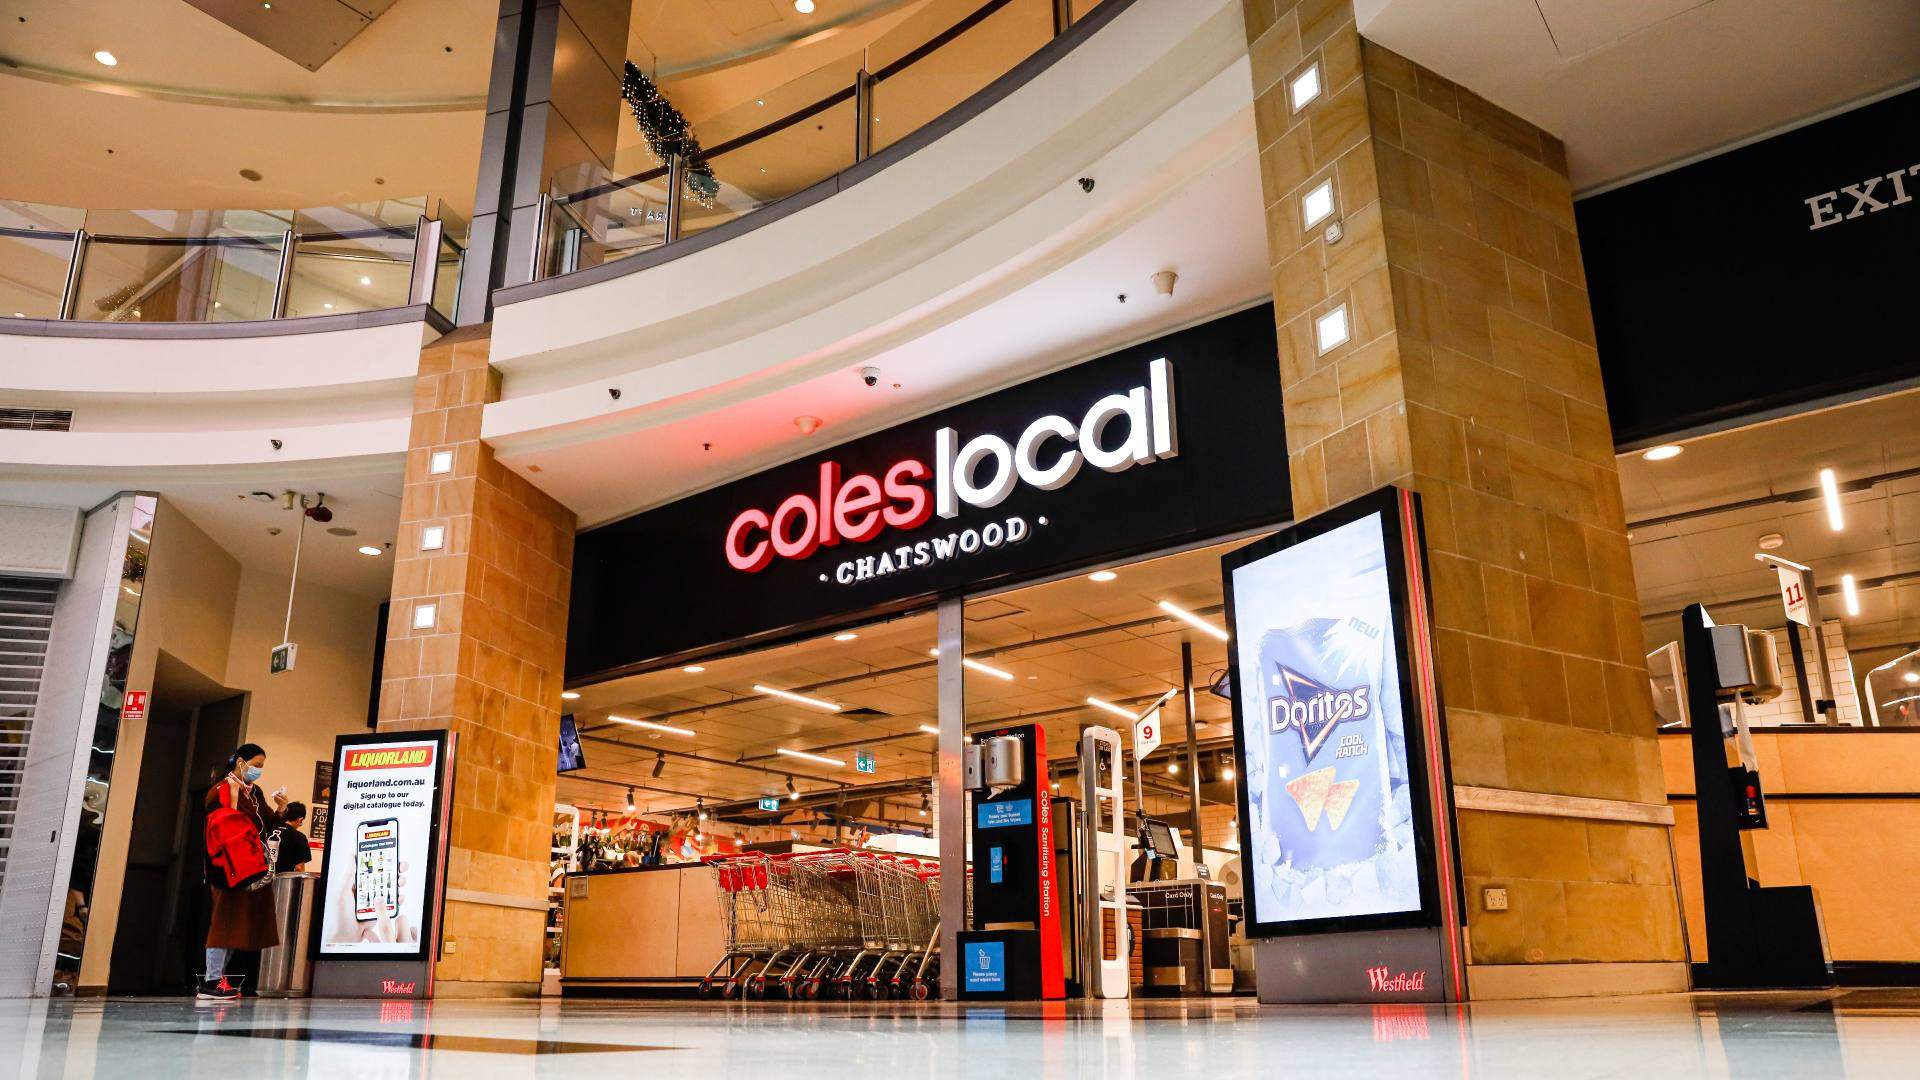 Coles' New Chatswood Store Has a Shampoo Refill Station and Dog Food Pick-and-Mix Bar